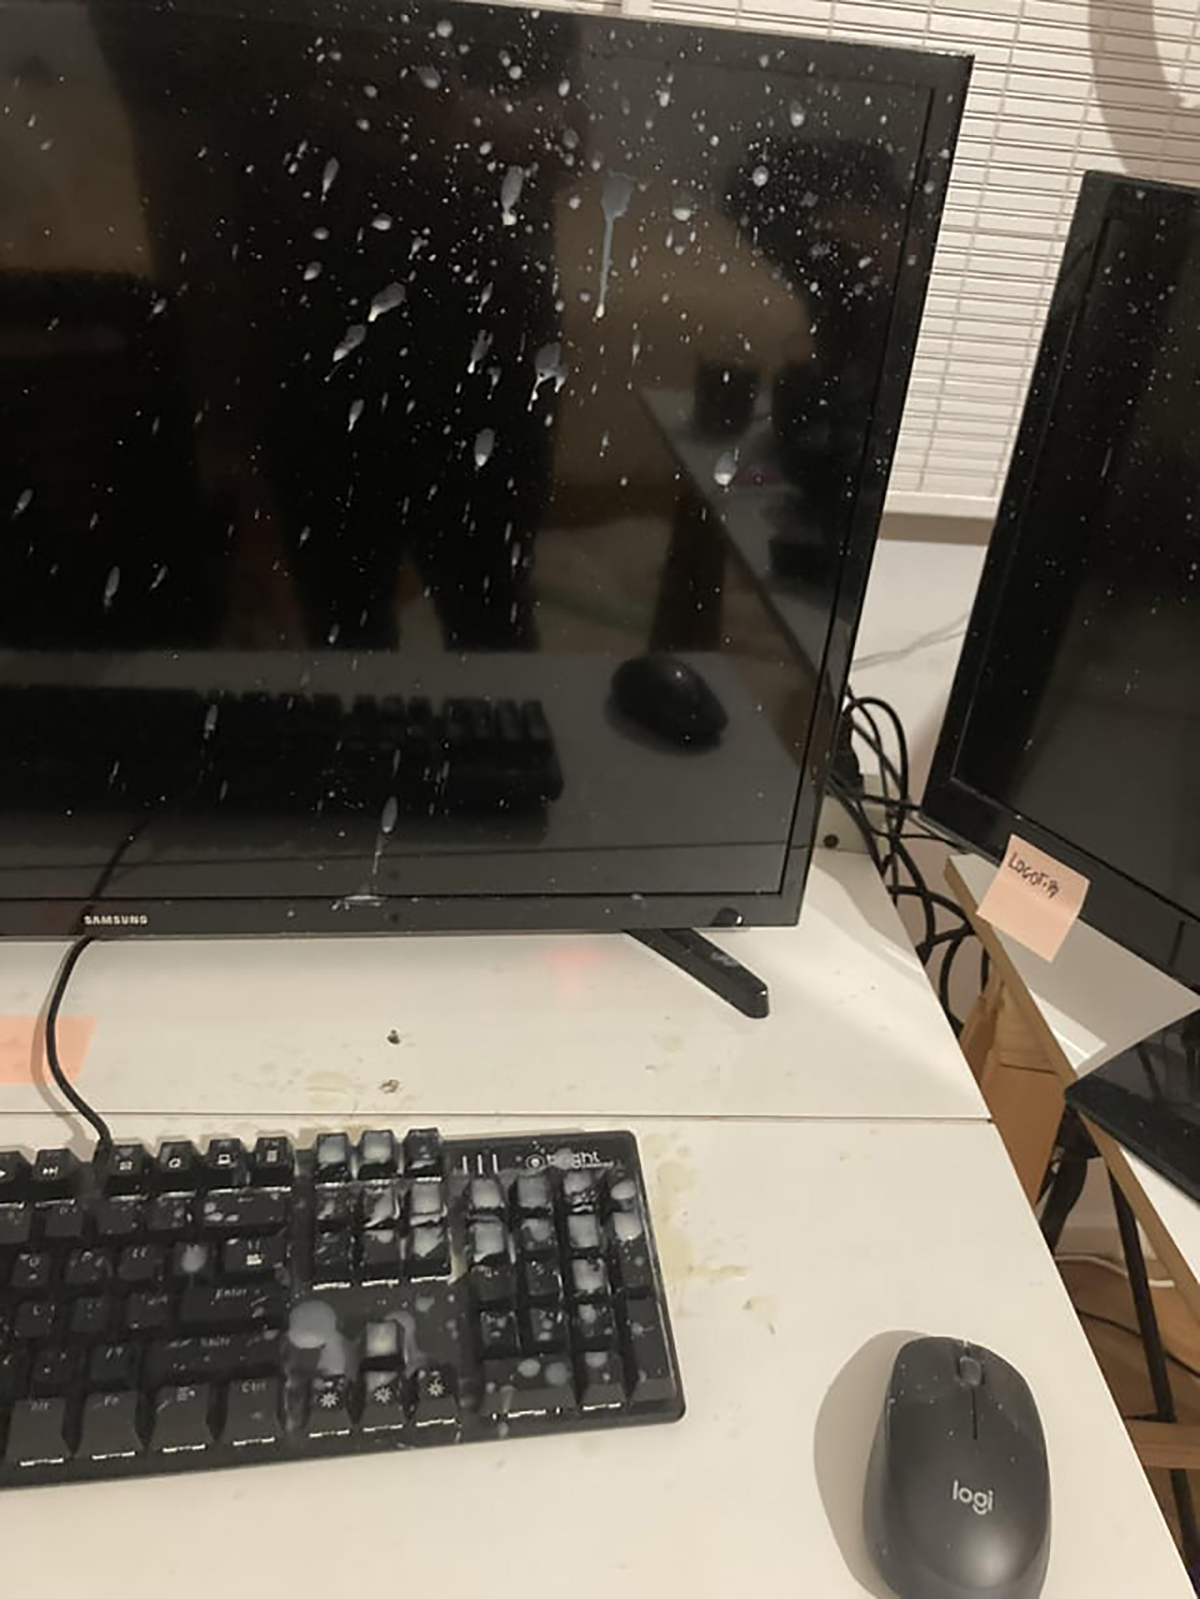 Wax all over the screen. At least that's what this guy claims...